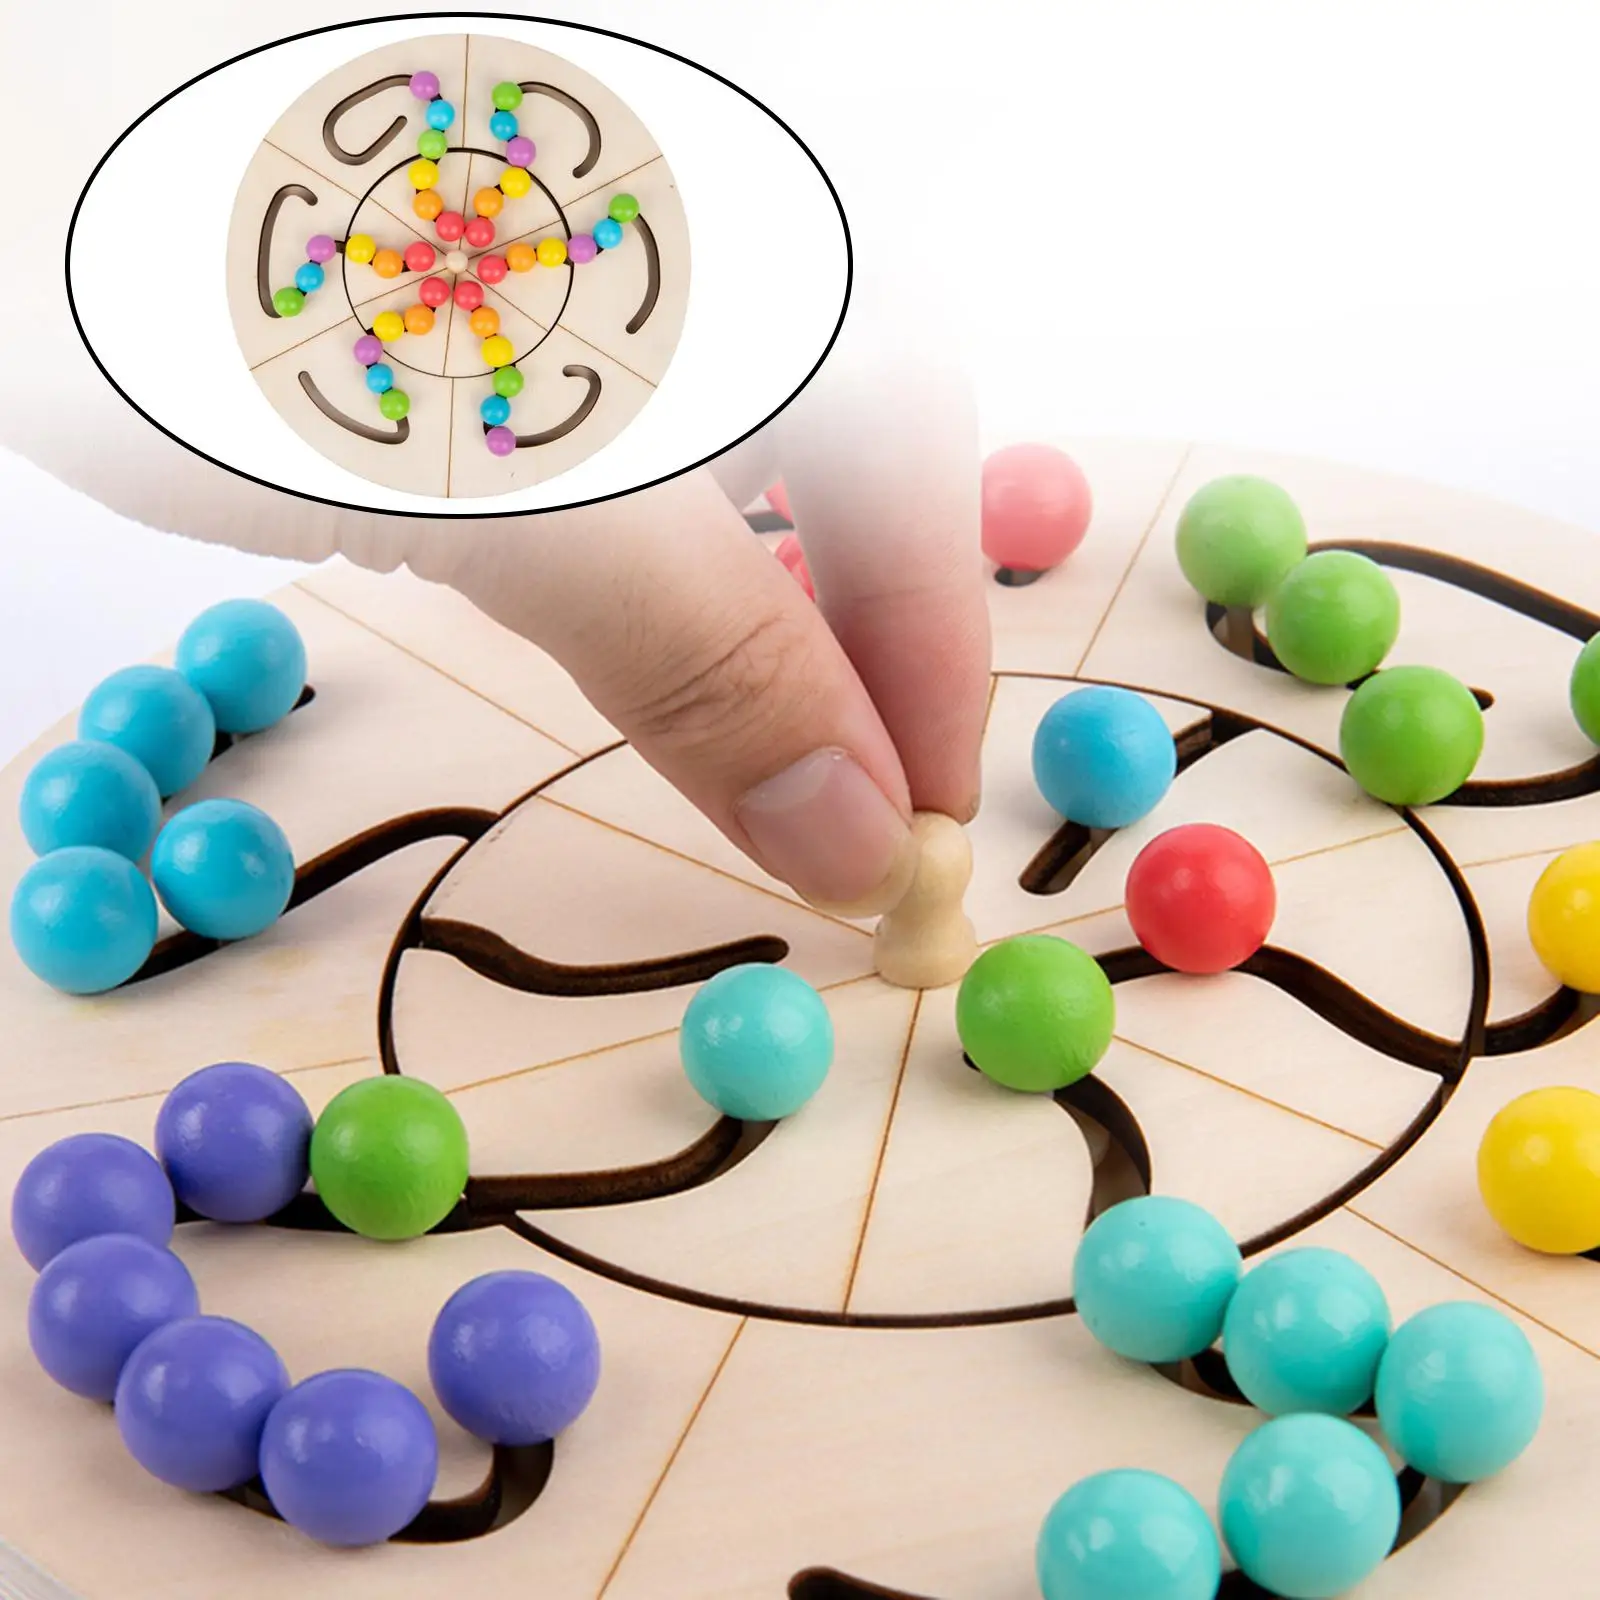 Montessori Wooden Bead Maze Puzzle Toys Activity Puzzle Brain Teaser Toddlers Educational Shape Sorting Gift